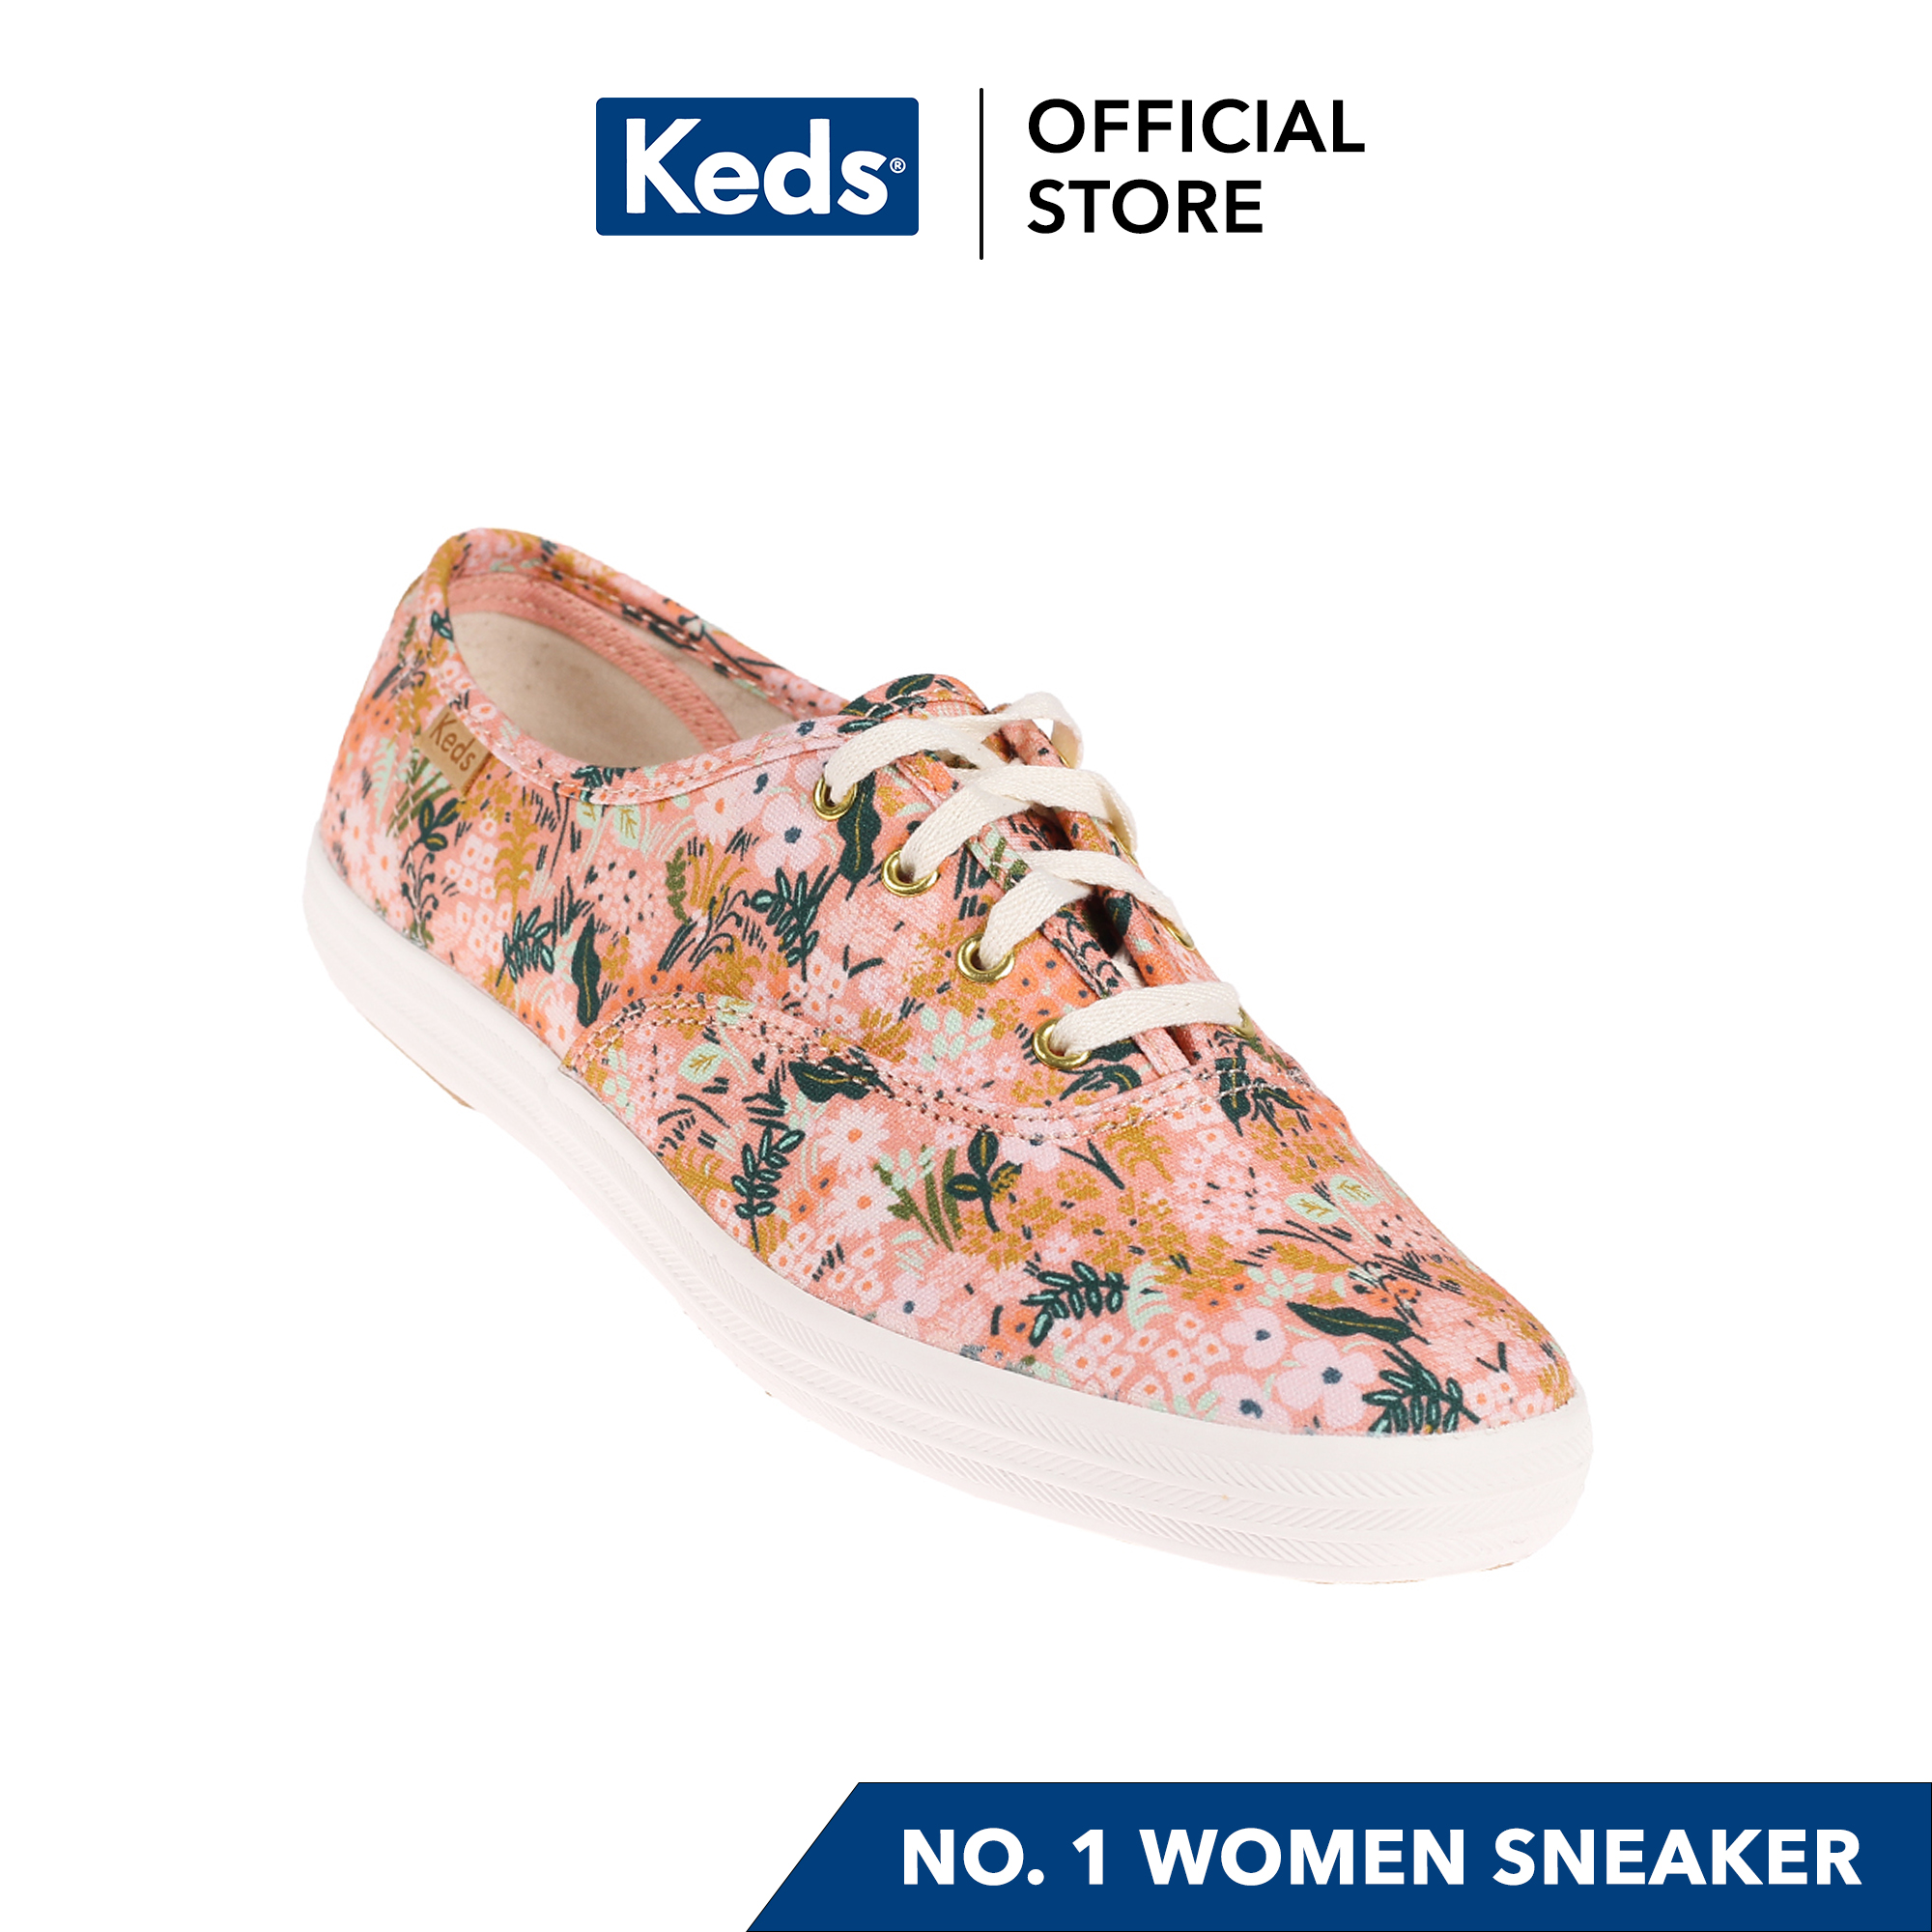 keds rubber shoes price